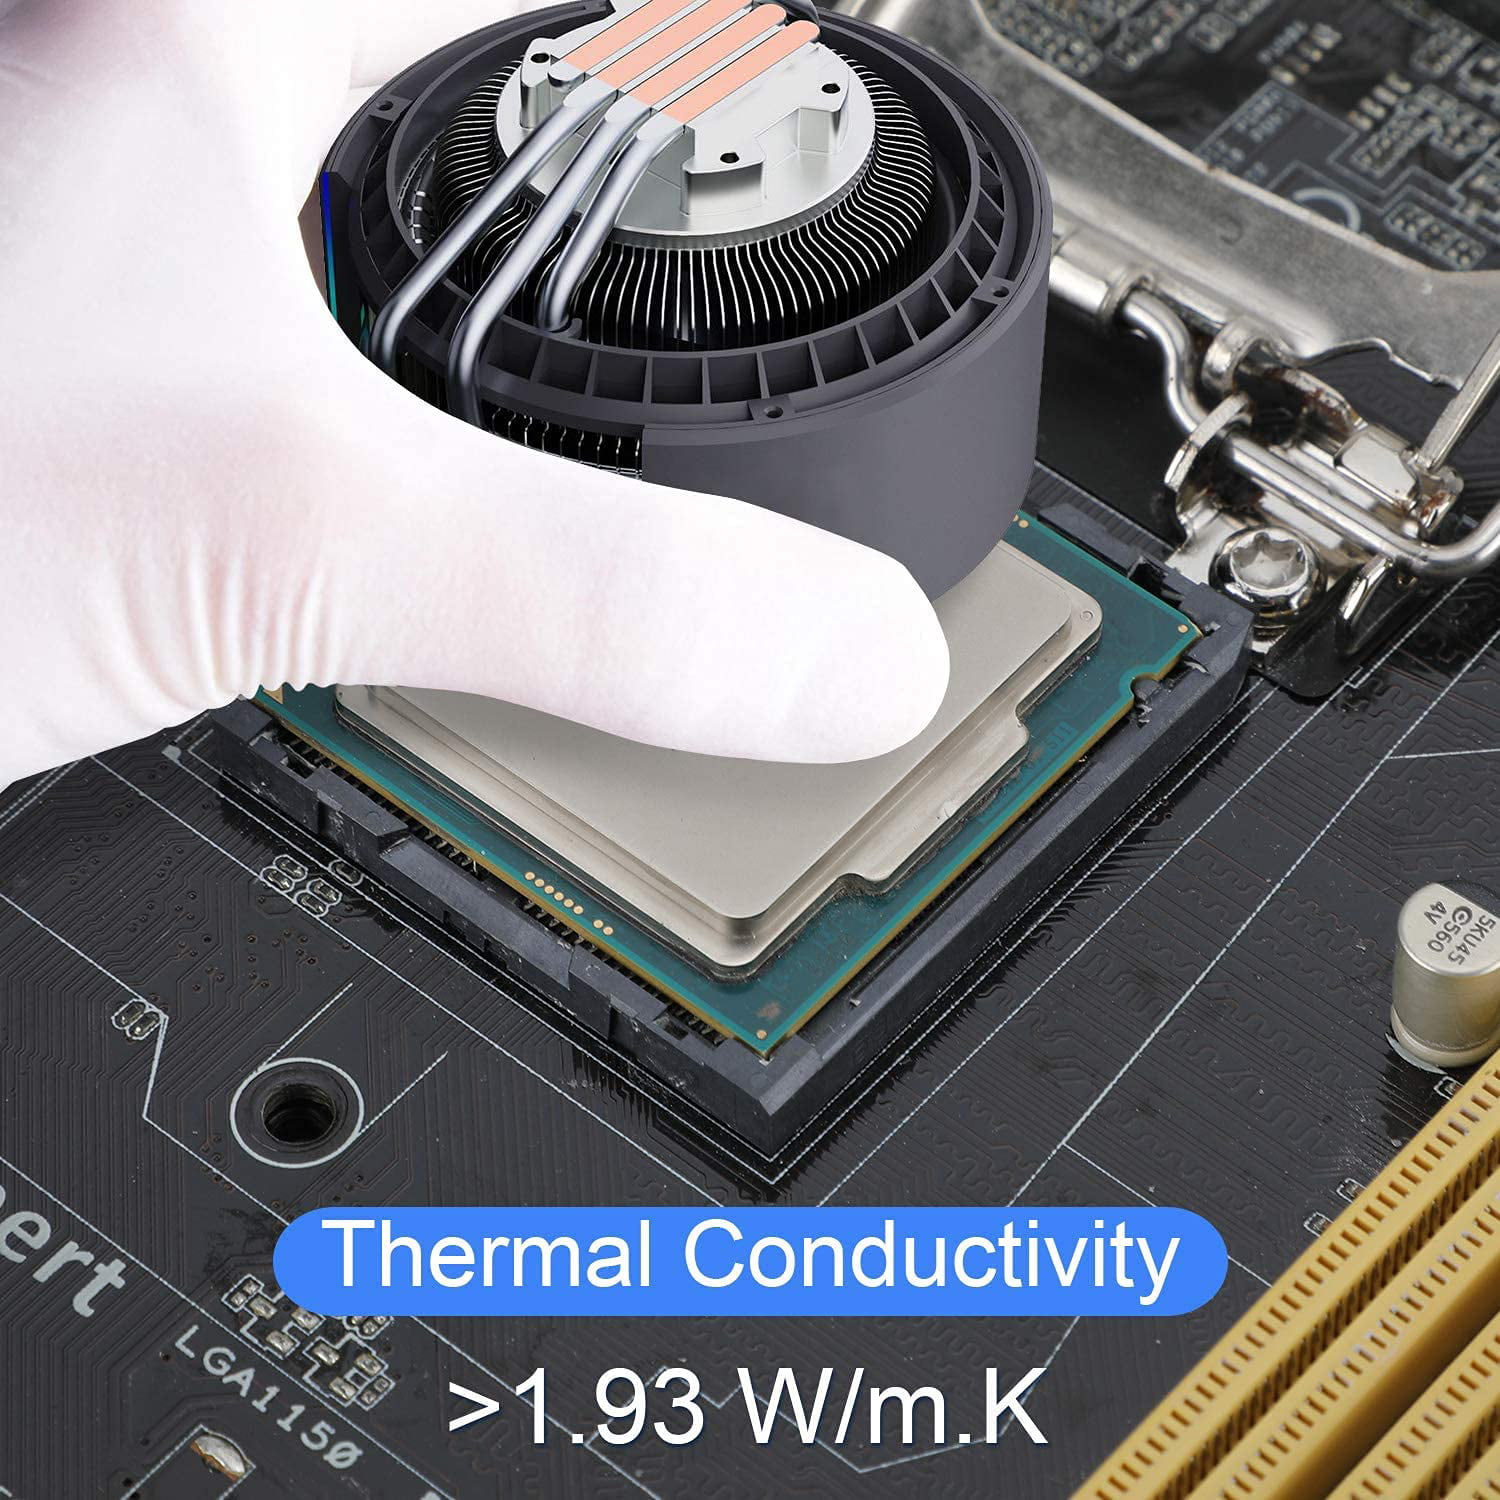 MoneyQiu HY-510-100g (25g*4) Thermal Conductivity: >1.93W/m-k thermal  heatsink paste grease Compound Carbon Based High Performance non-conductive  for